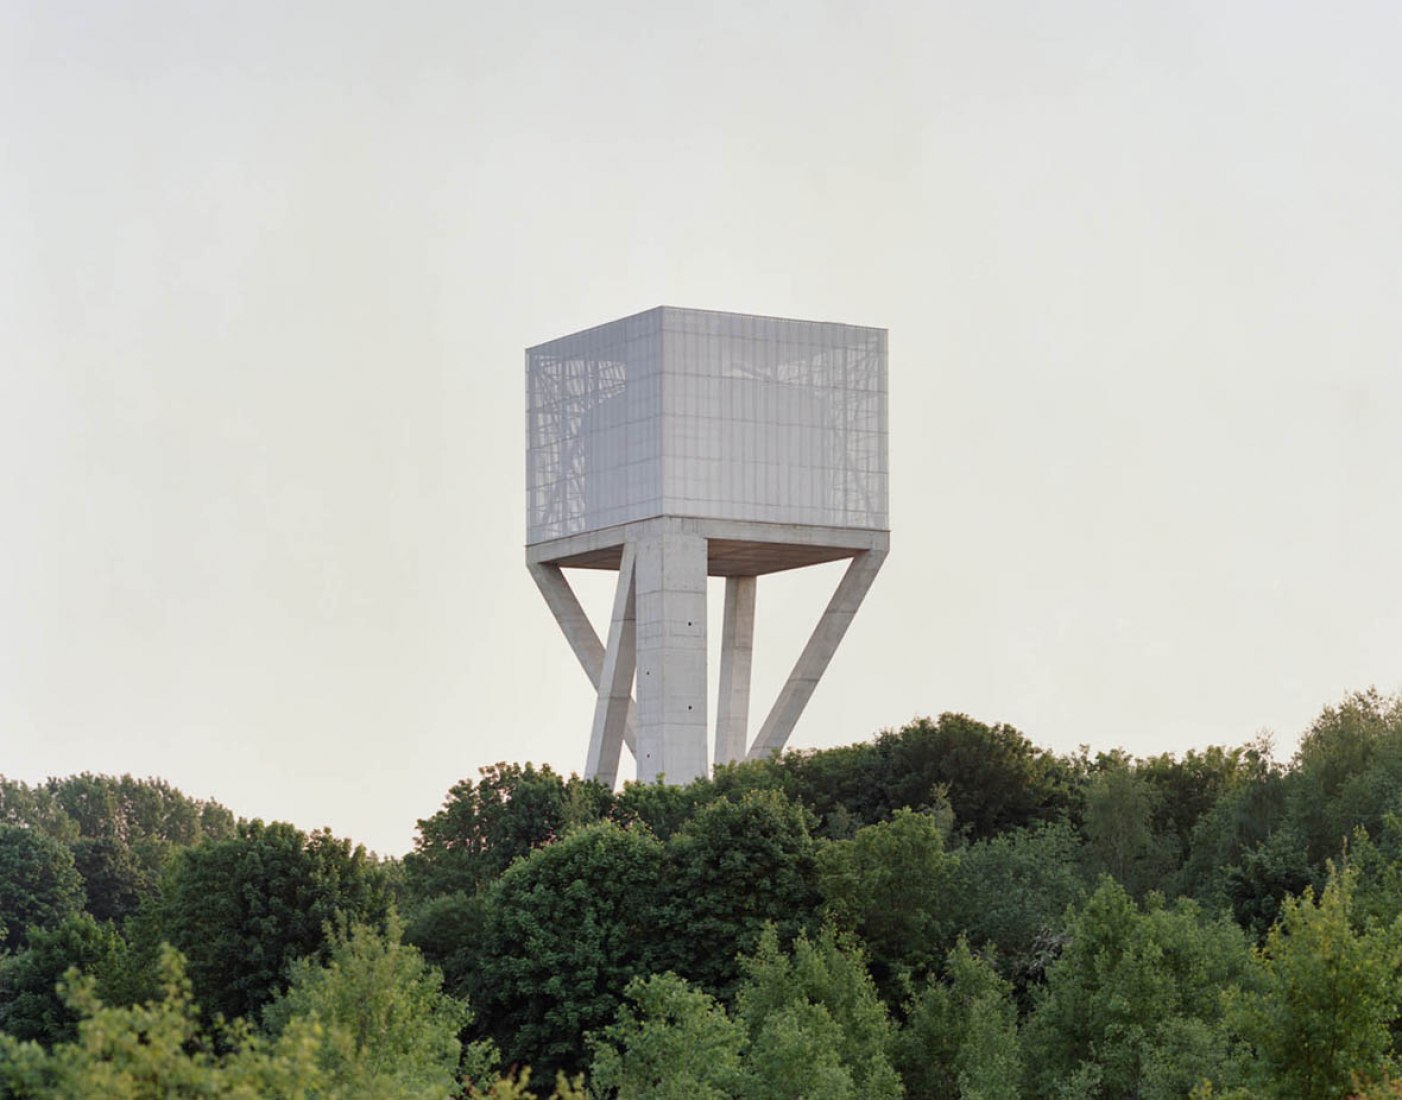 Ghlin Water tower / Chateau d'eau by V+. Photograph @ Maxime Delvaux/354 photographers, Courtesy of V+.